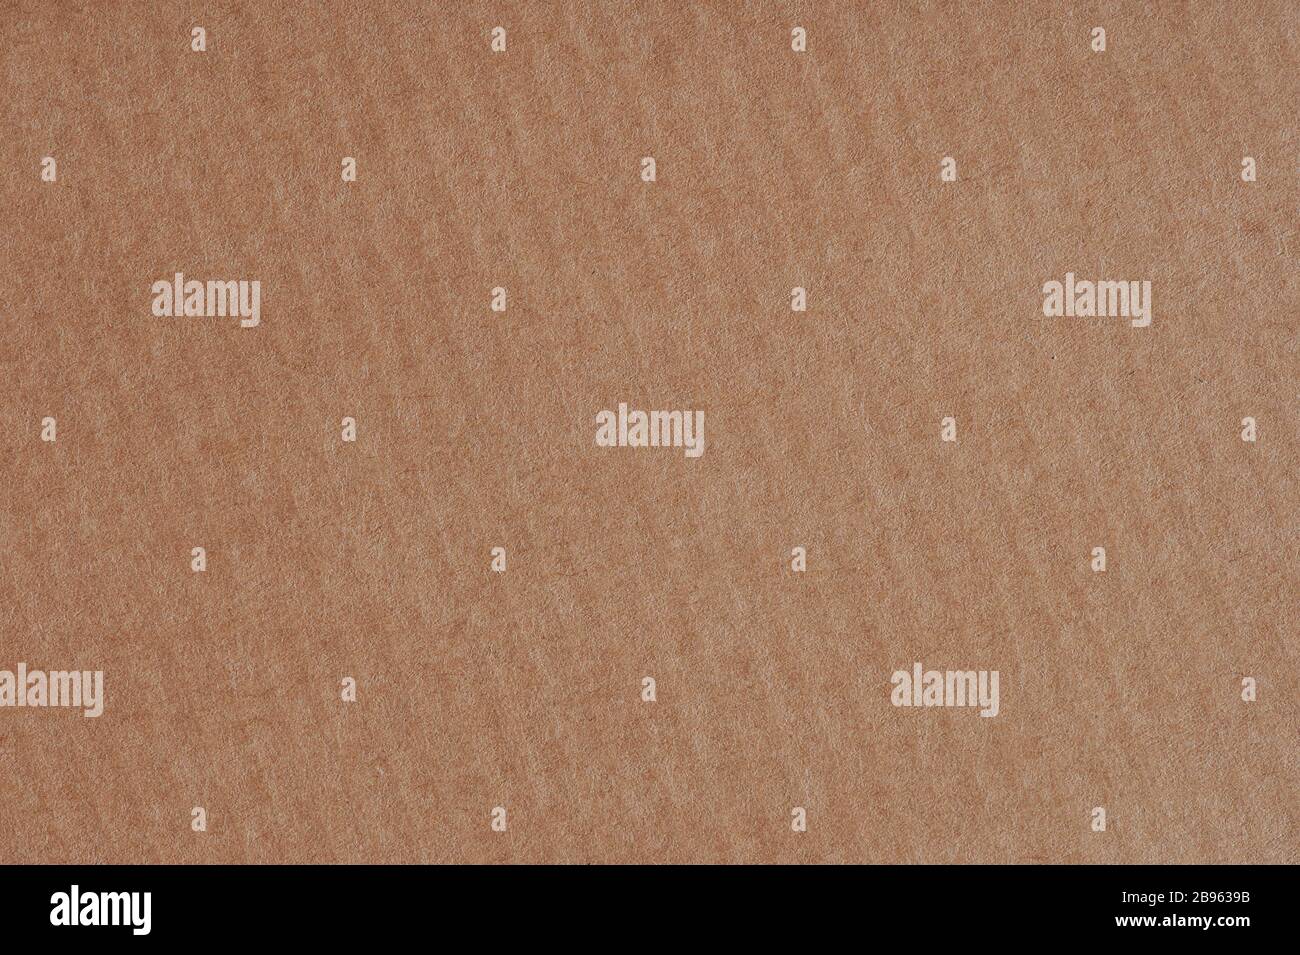 Sheet of brown paper texture background macro close up view Stock Photo